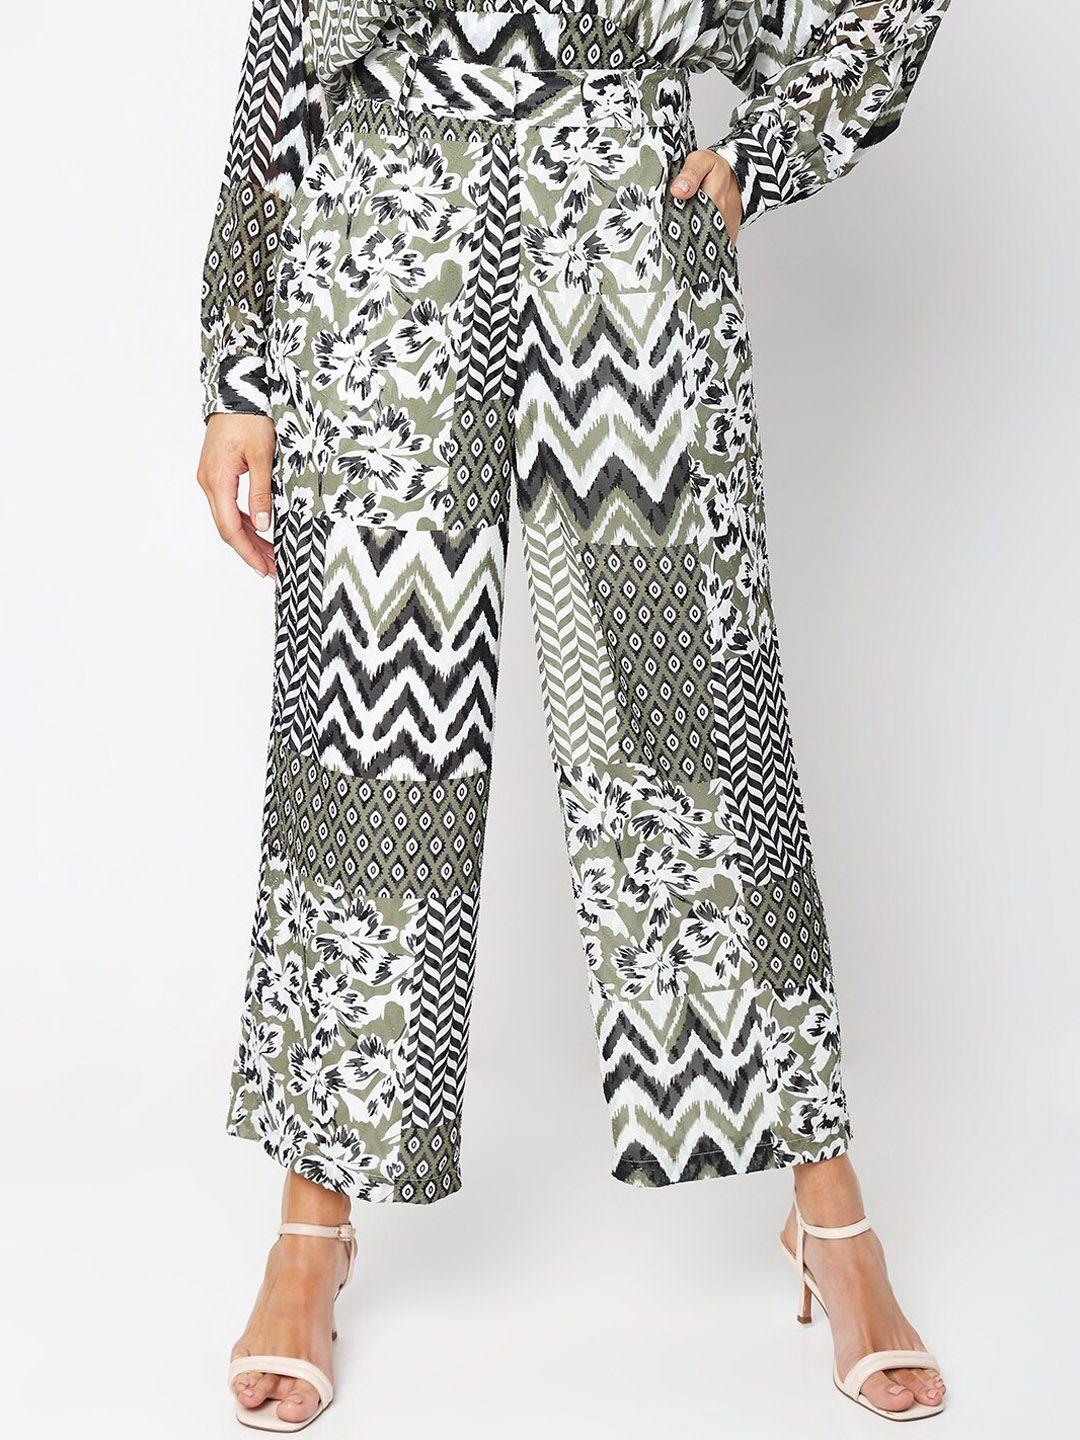 vero moda women floral printed high-rise parallel trousers